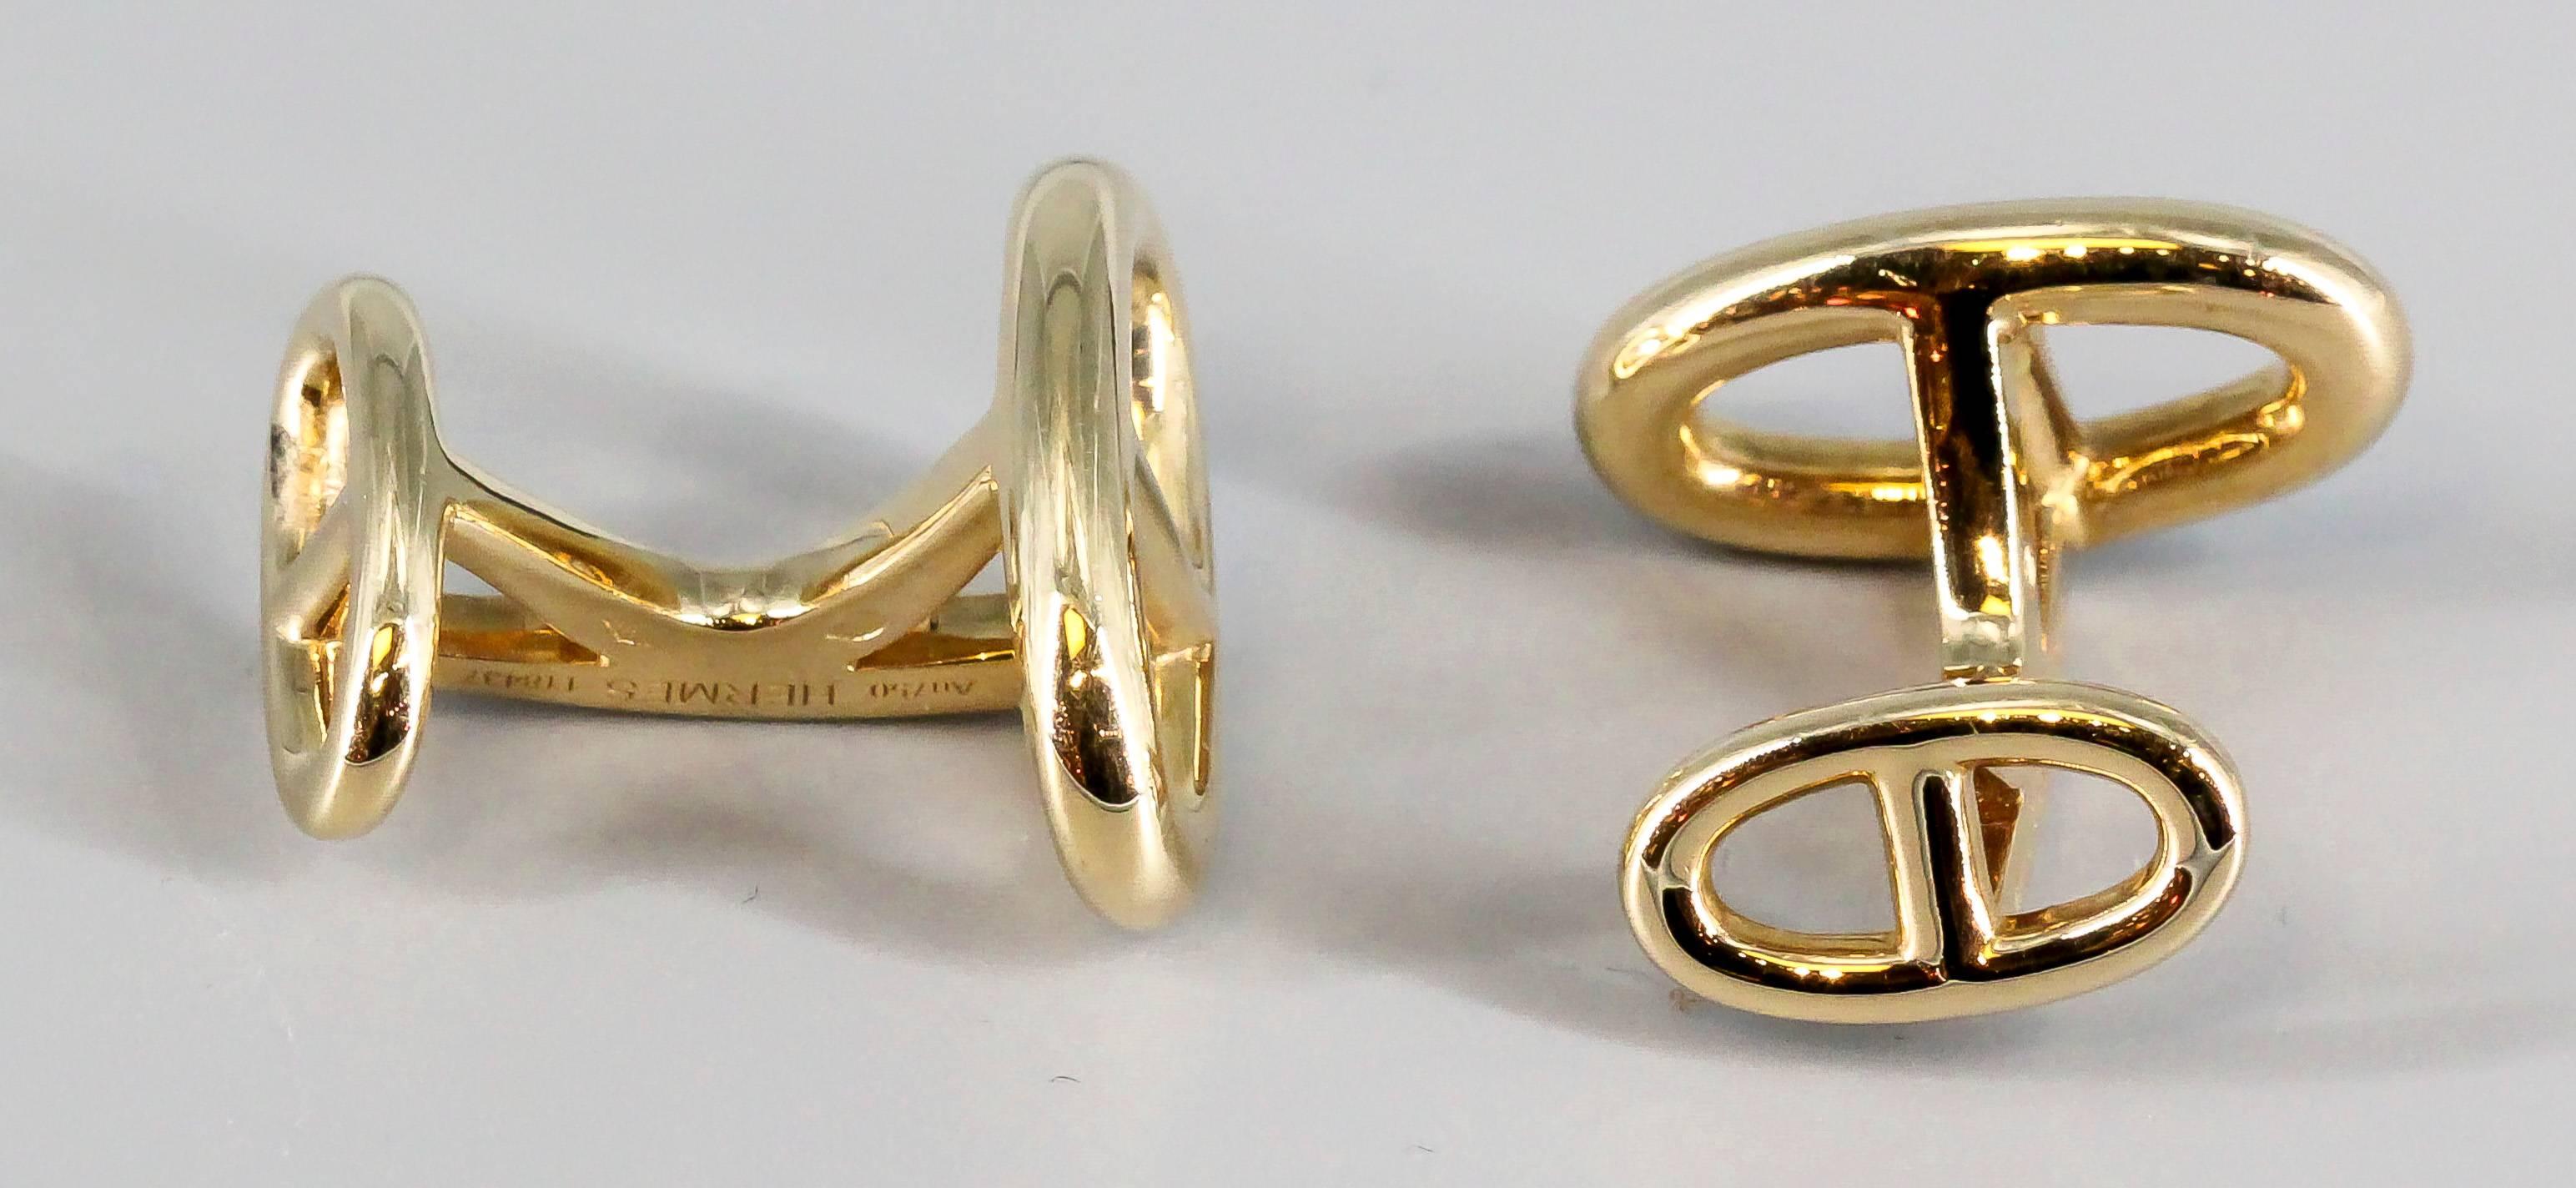 Handsome 18K yellow gold cufflinks from the 